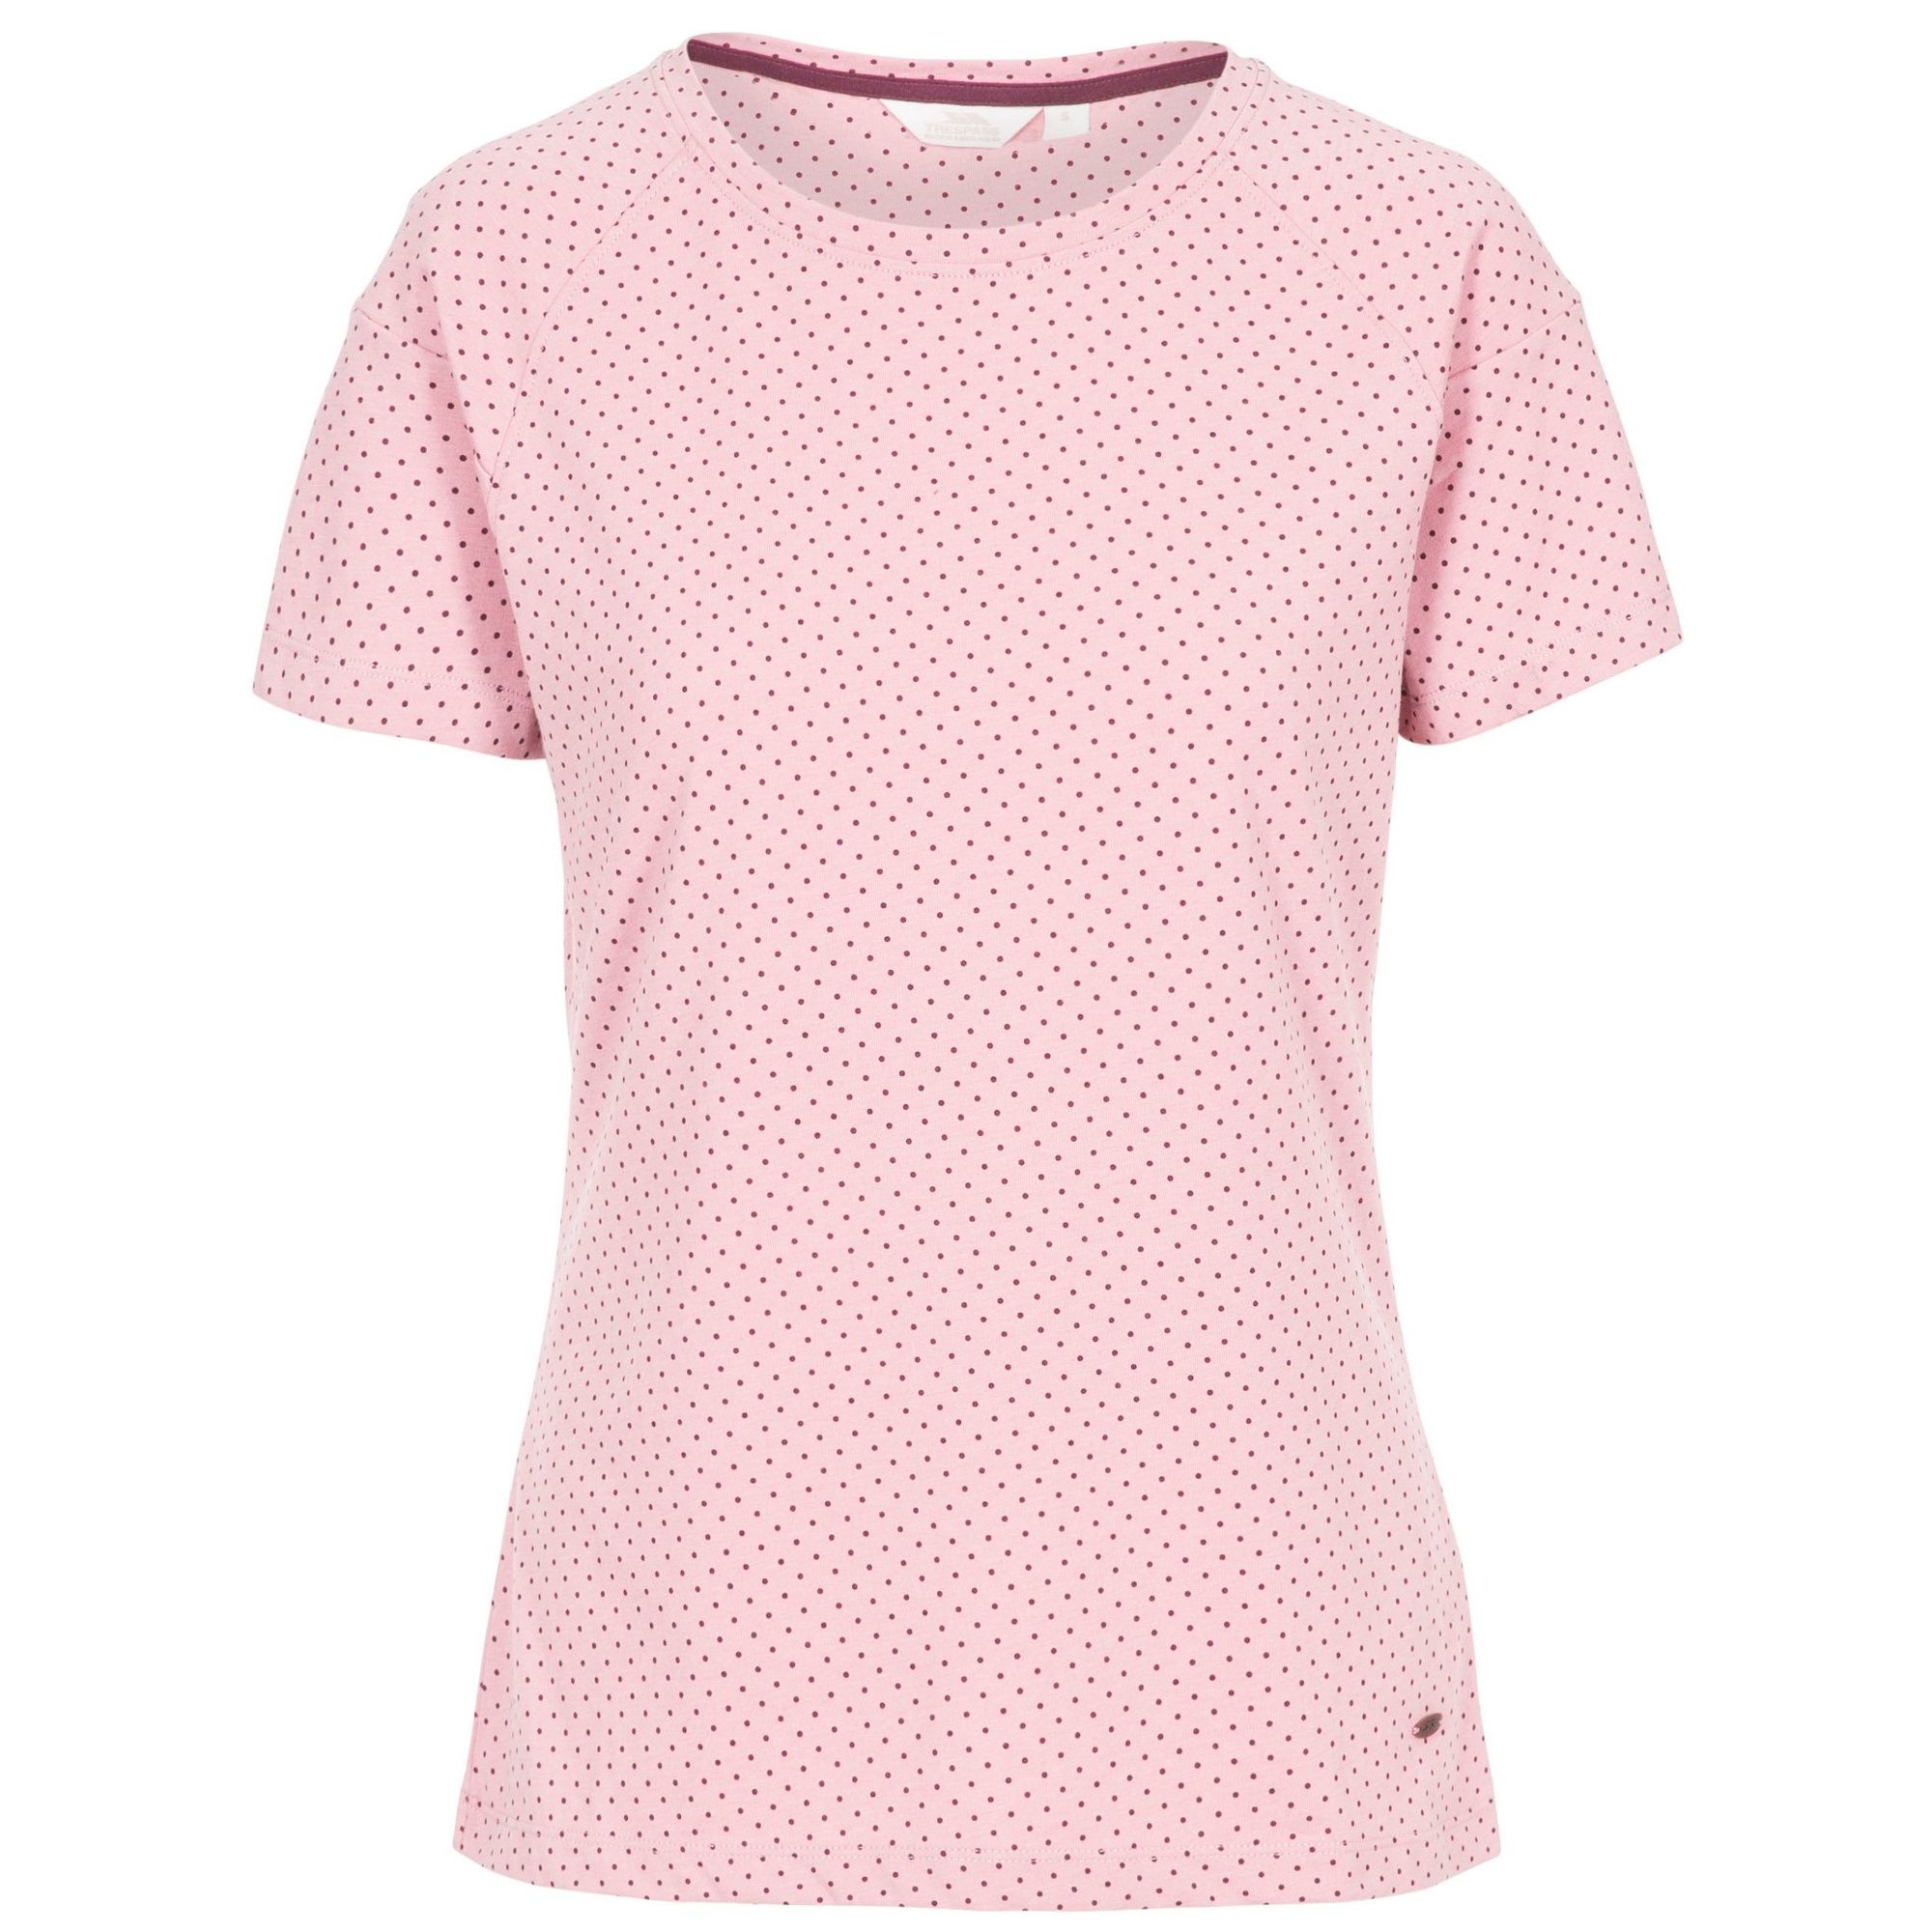 60% Cotton, 40% Polyester. Short sleeve raglan. Round neck. Contrast colour inner neck tape. All-over print. Trespass Womens Chest Sizing (approx): XS/8 - 32in/81cm, S/10 - 34in/86cm, M/12 - 36in/91.4cm, L/14 - 38in/96.5cm, XL/16 - 40in/101.5cm, XXL/18 - 42in/106.5cm.